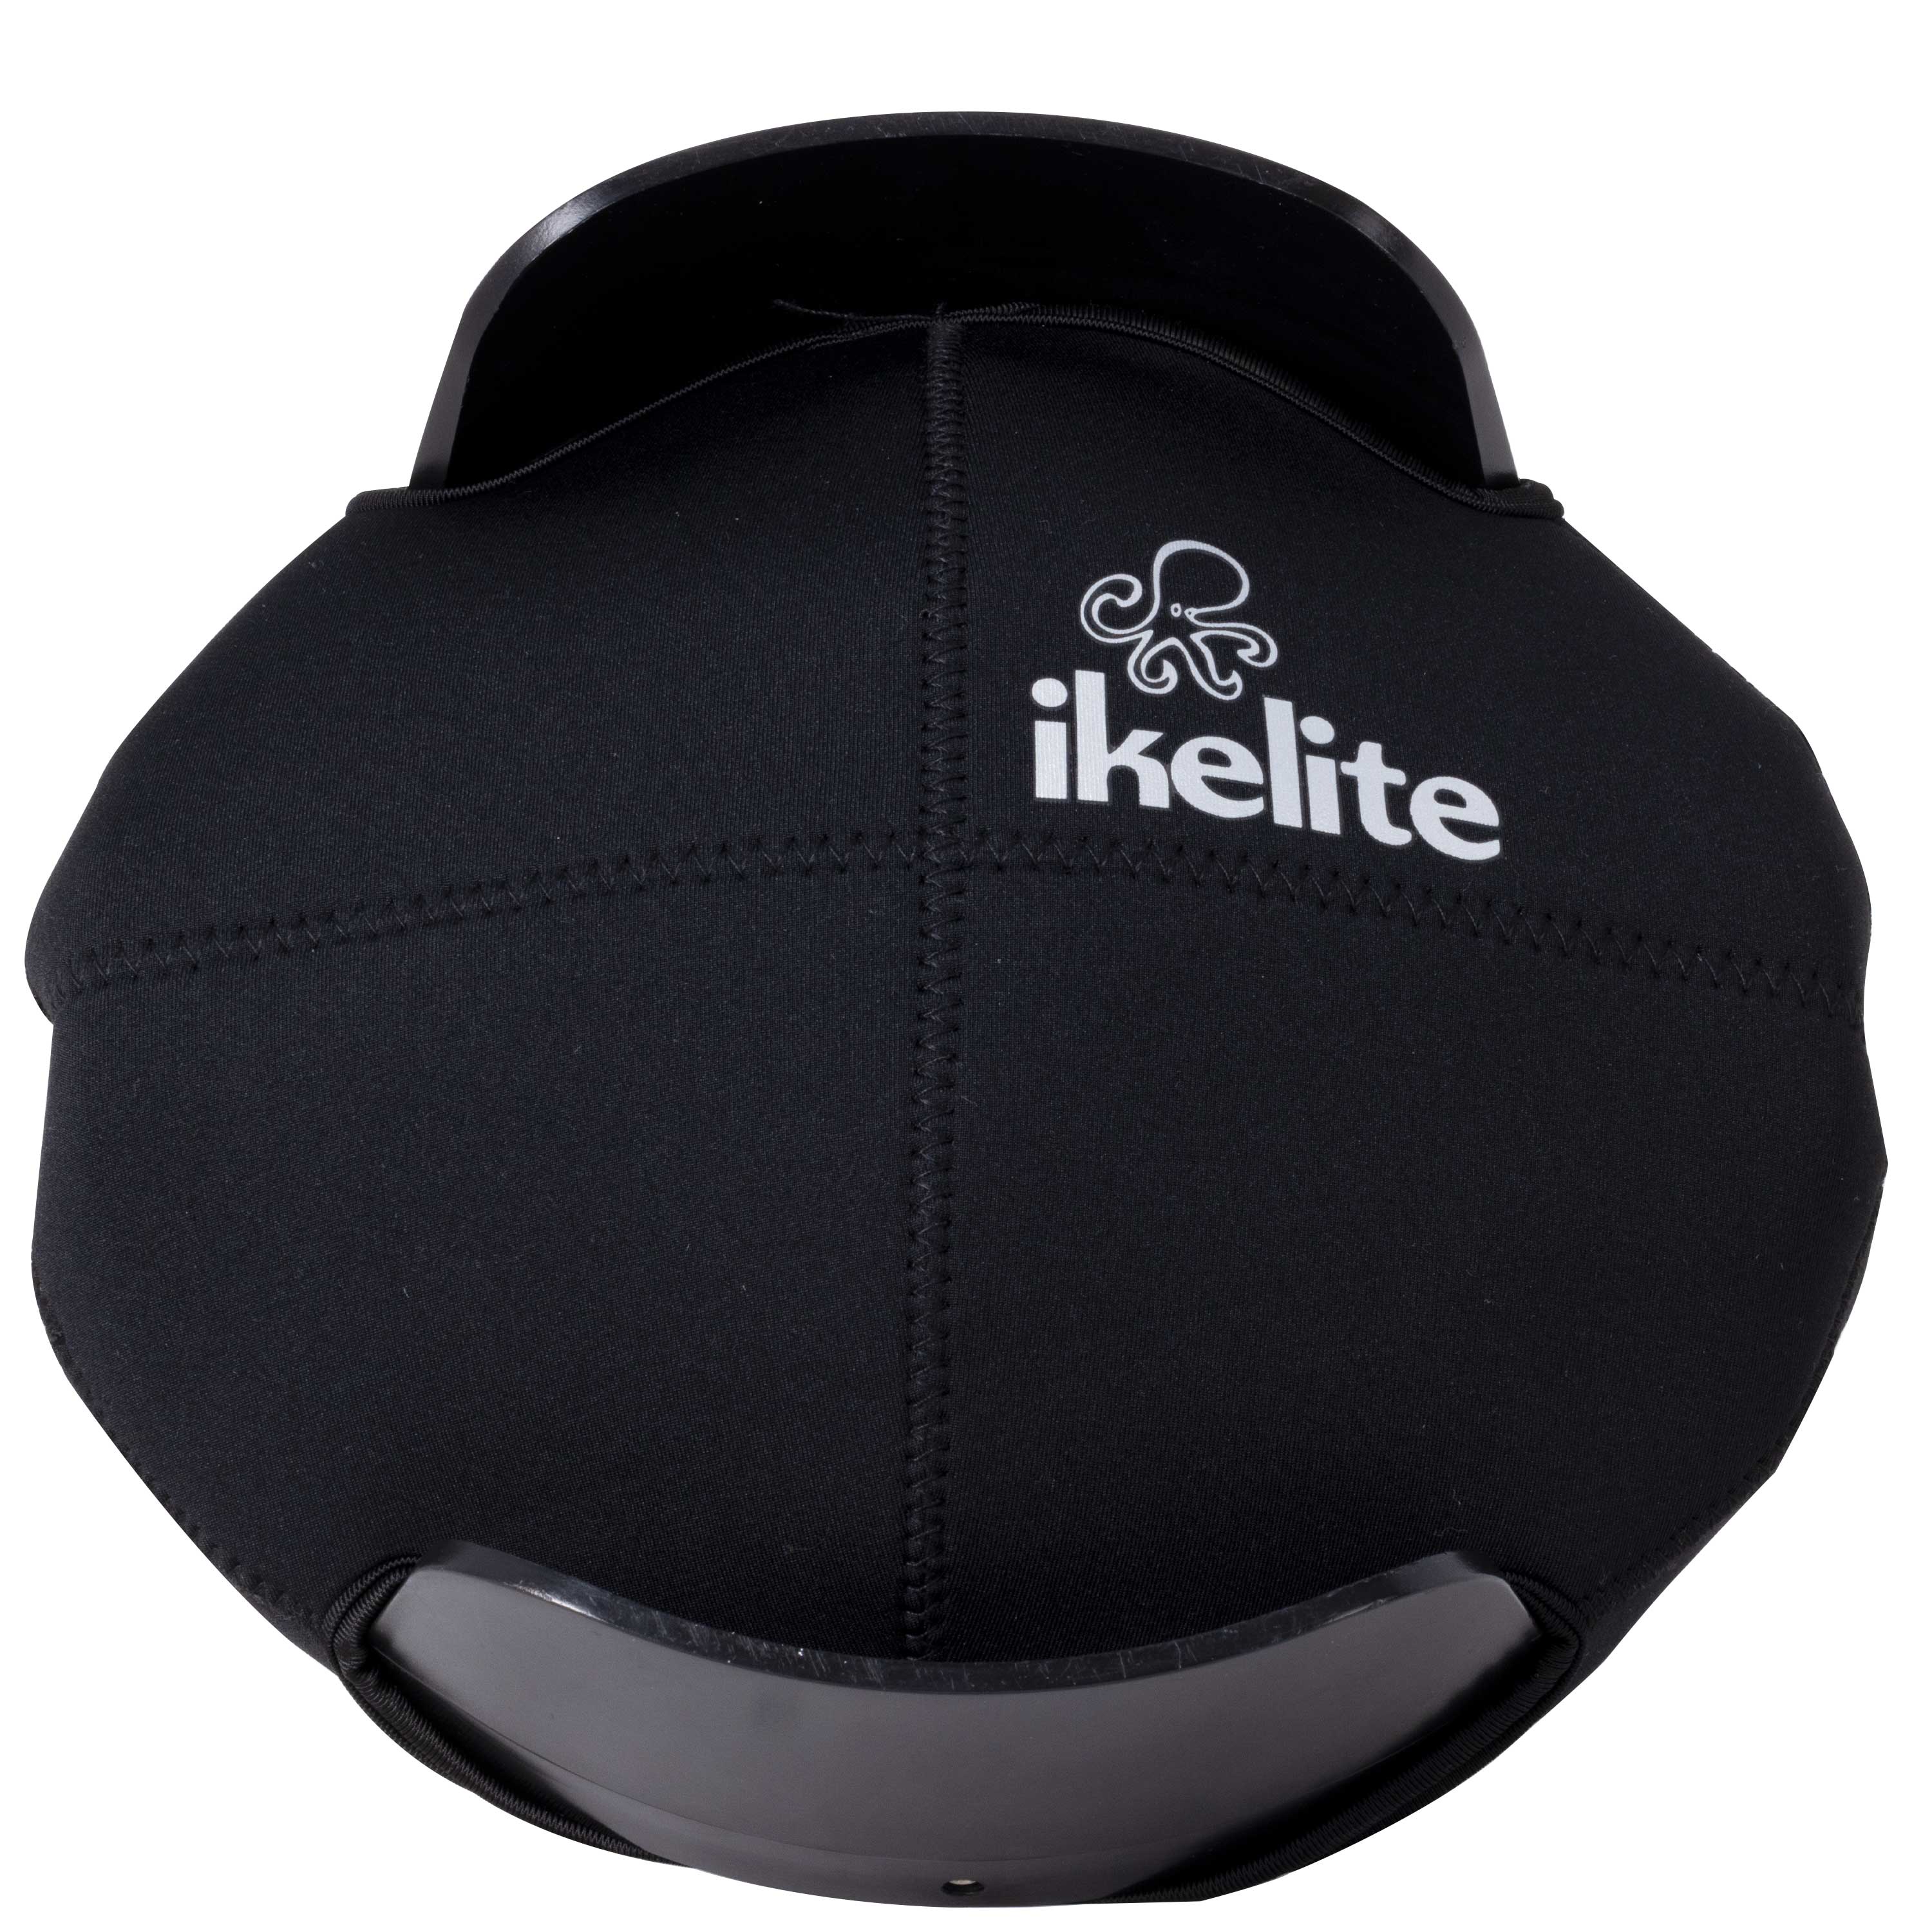 Ikelite Neoprene Cover for DL or DLM 8 inch Dome Port